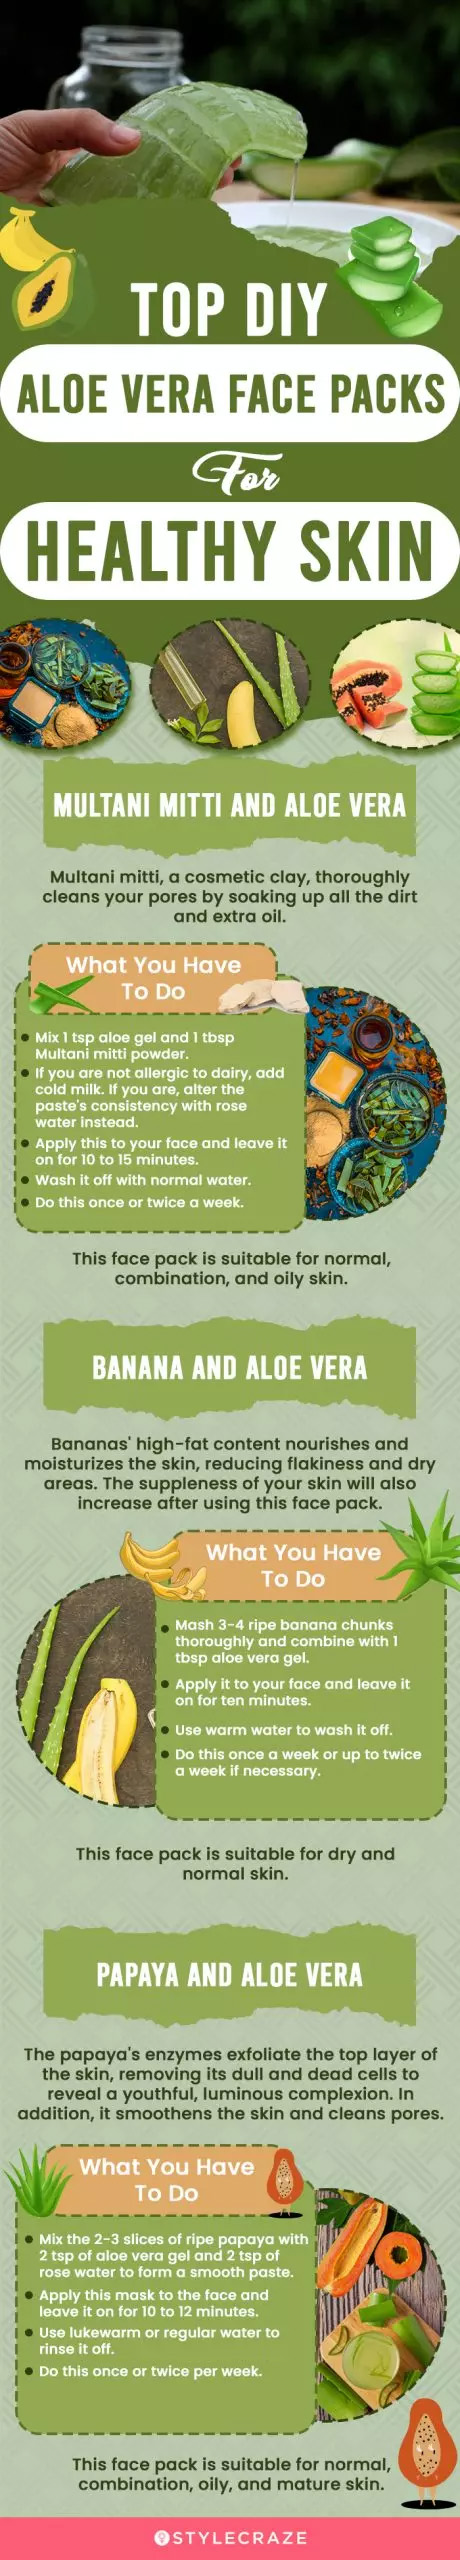 top diy aloevera face packs for healthy skin (infographic)